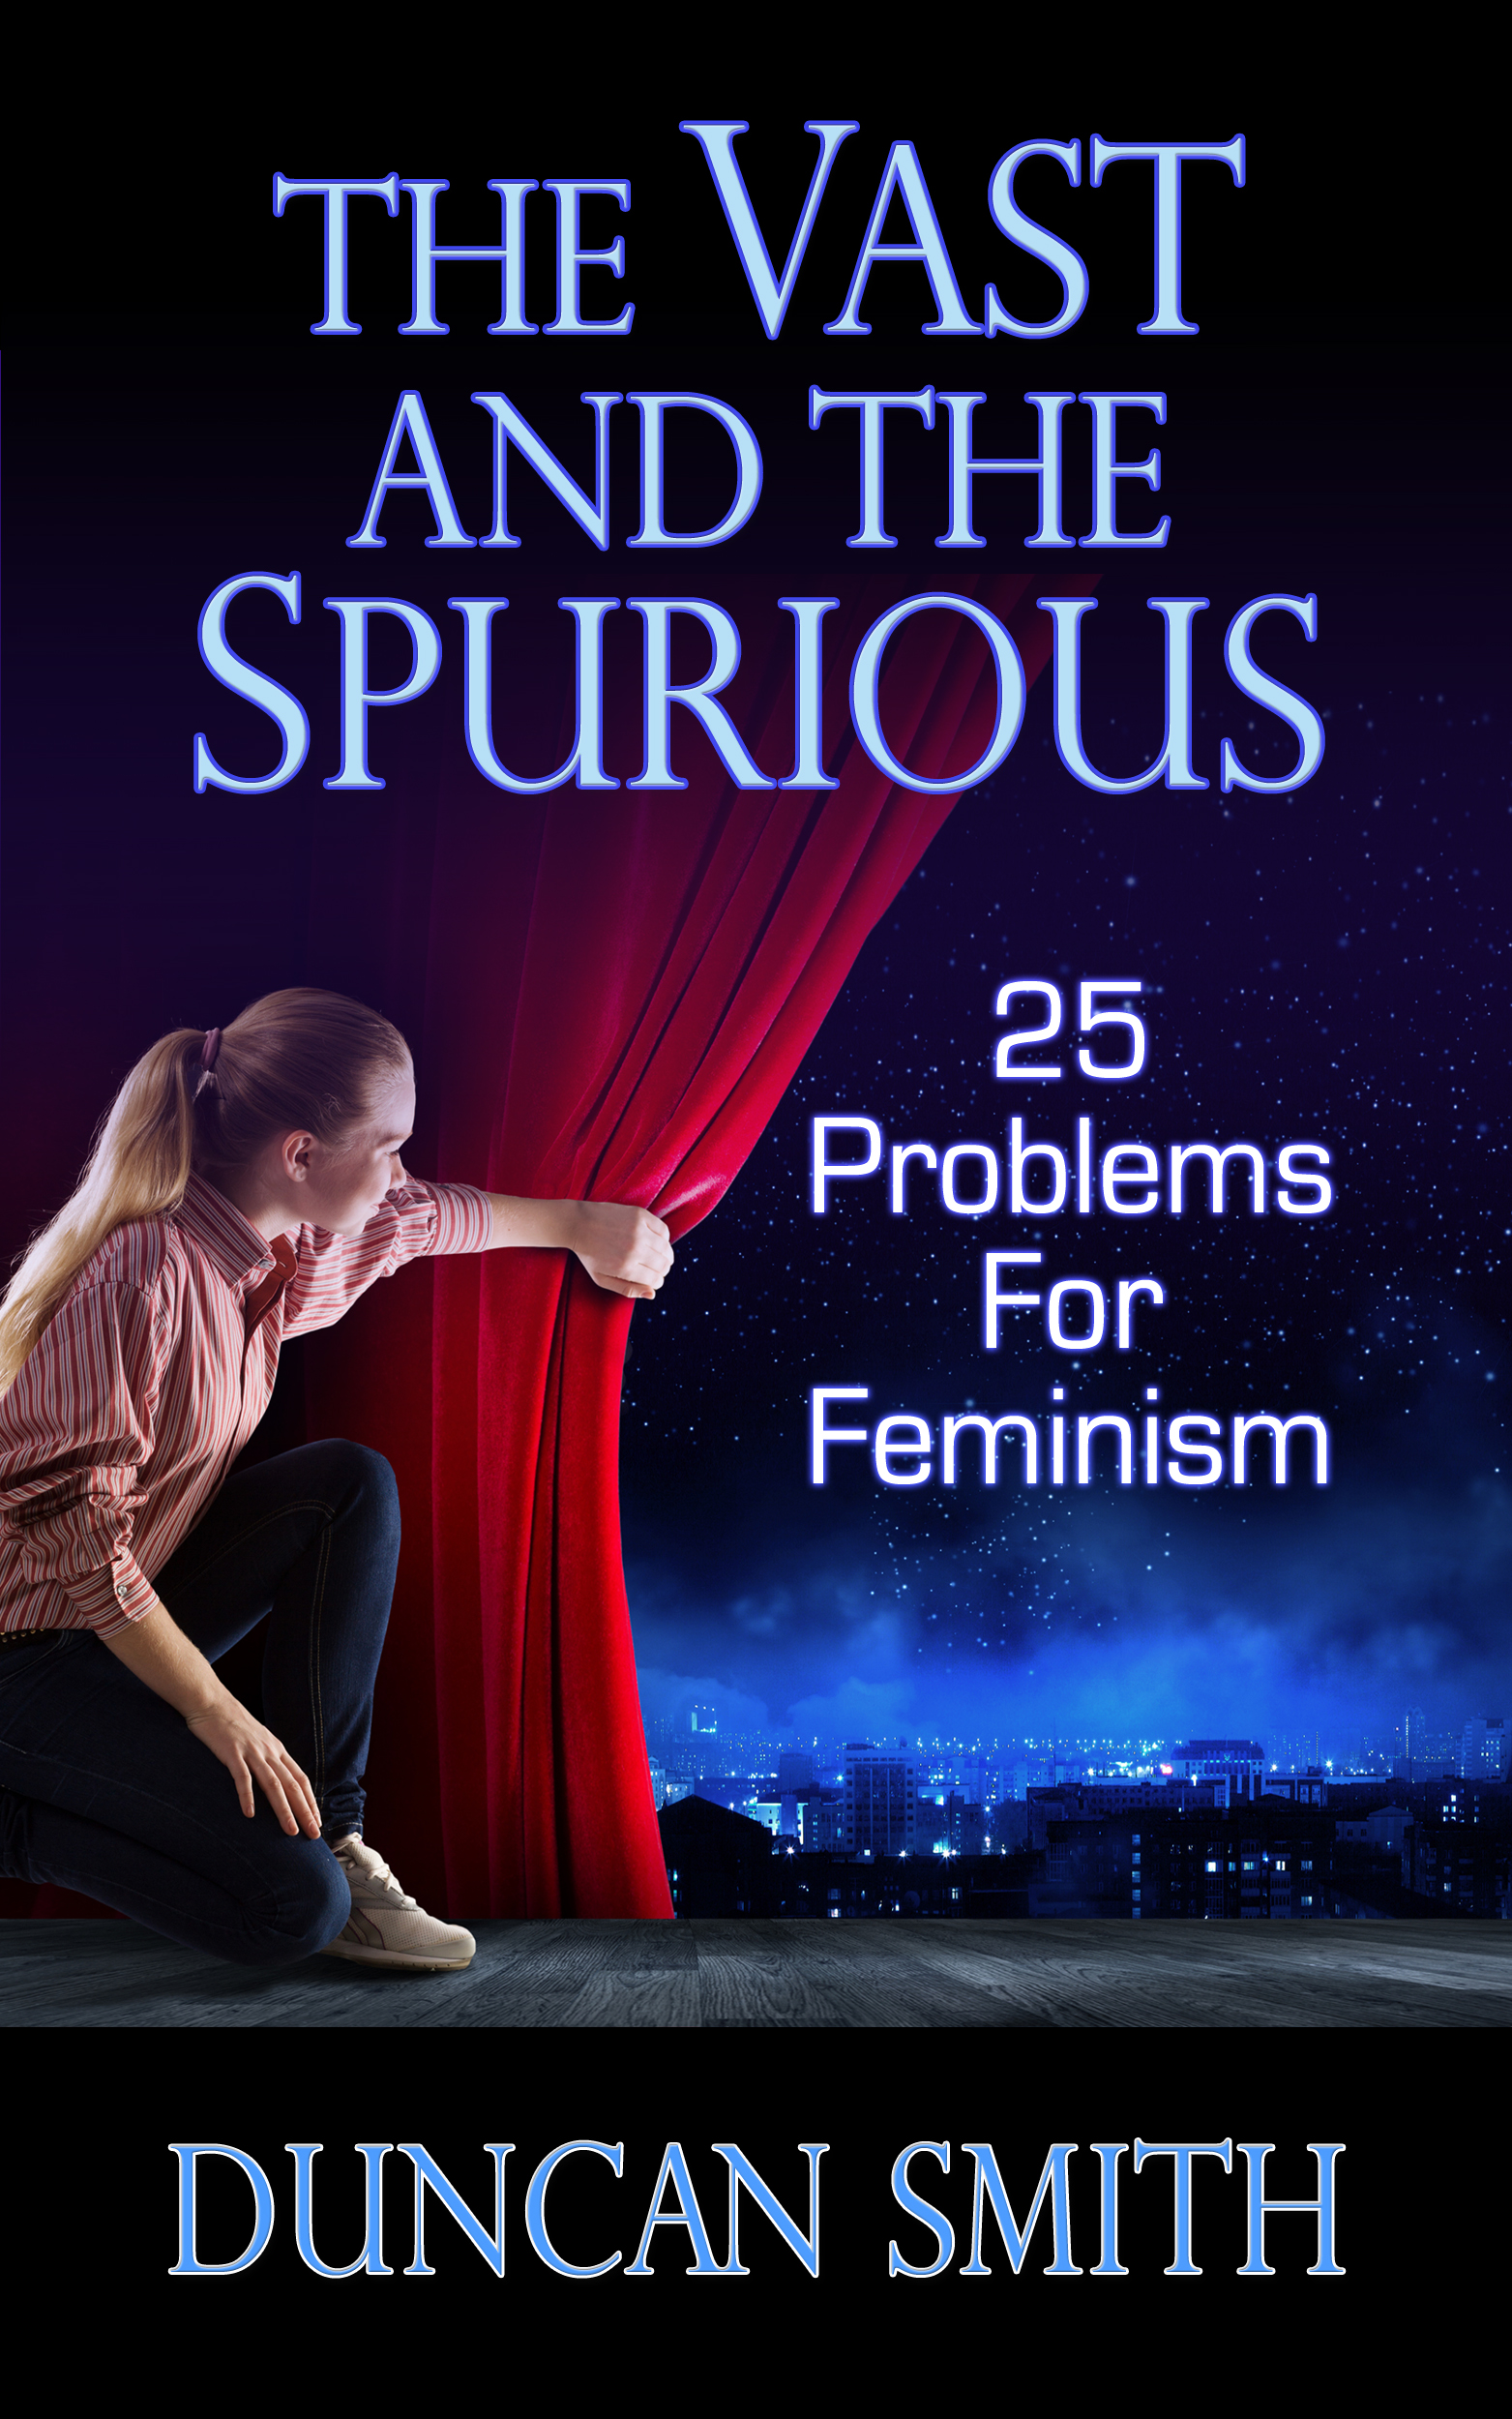 The Vast and the Spurious – 25 Problems for Feminism